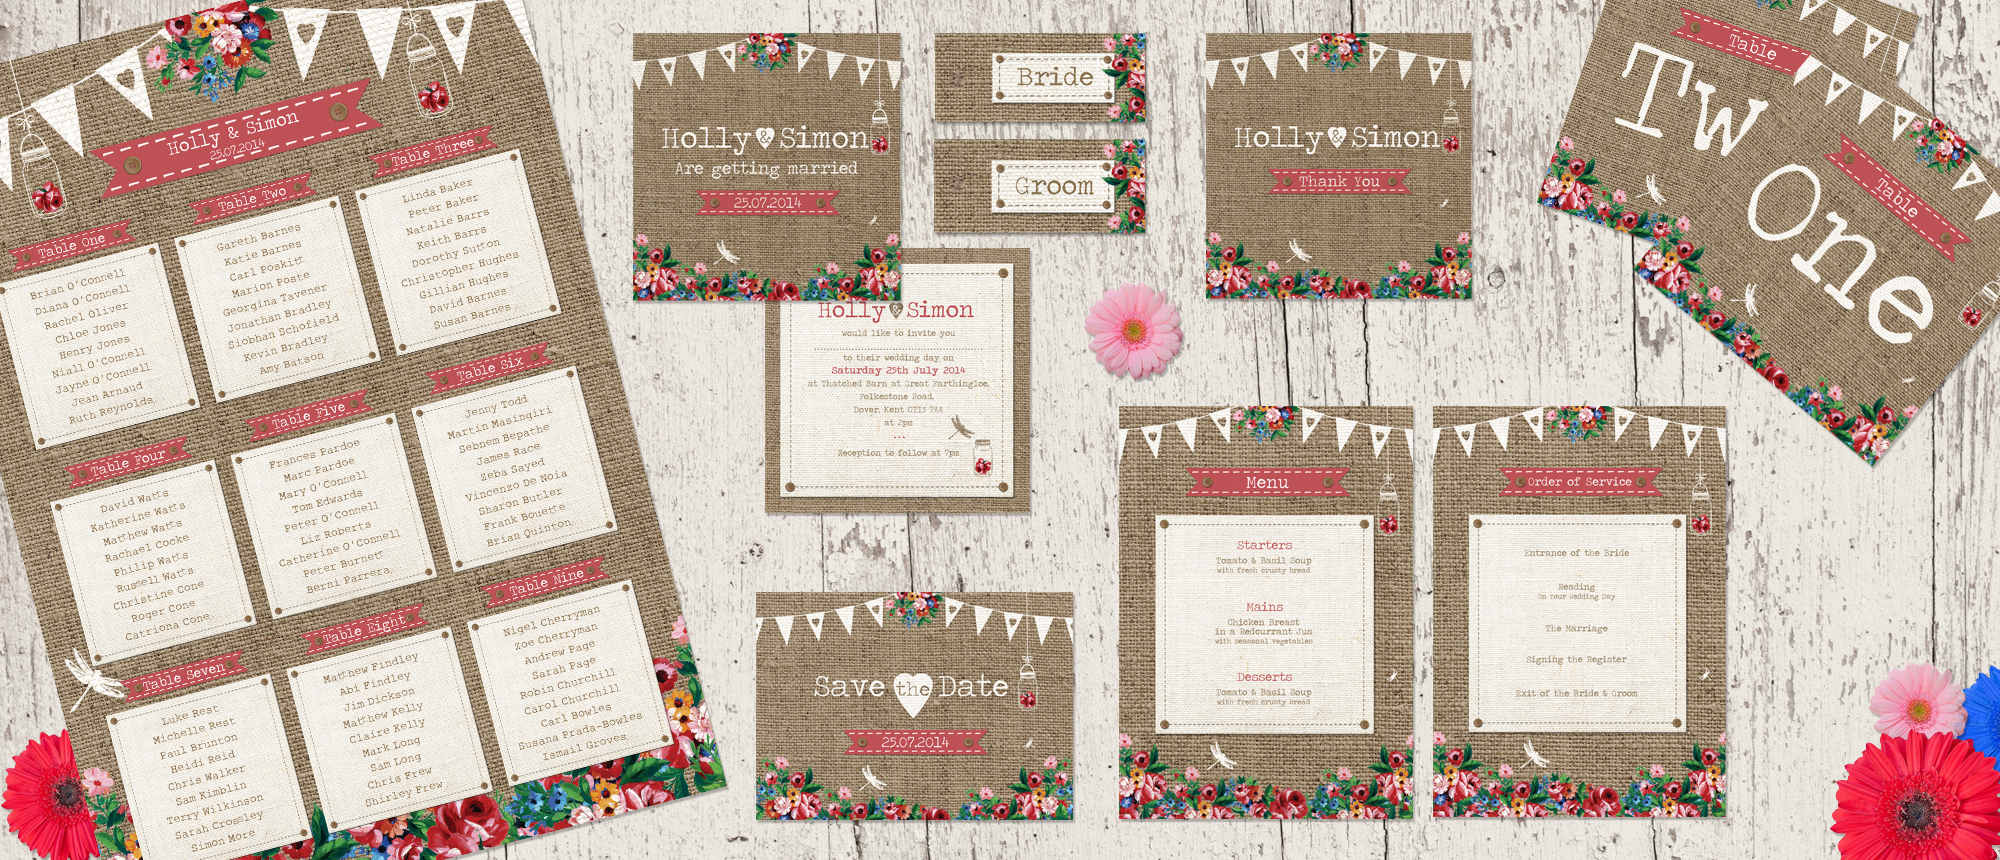 A rustic, enchanted woodland design with a screen-printed effect of bunting and colourful blooms layered on a contrasting hessian backdrop.